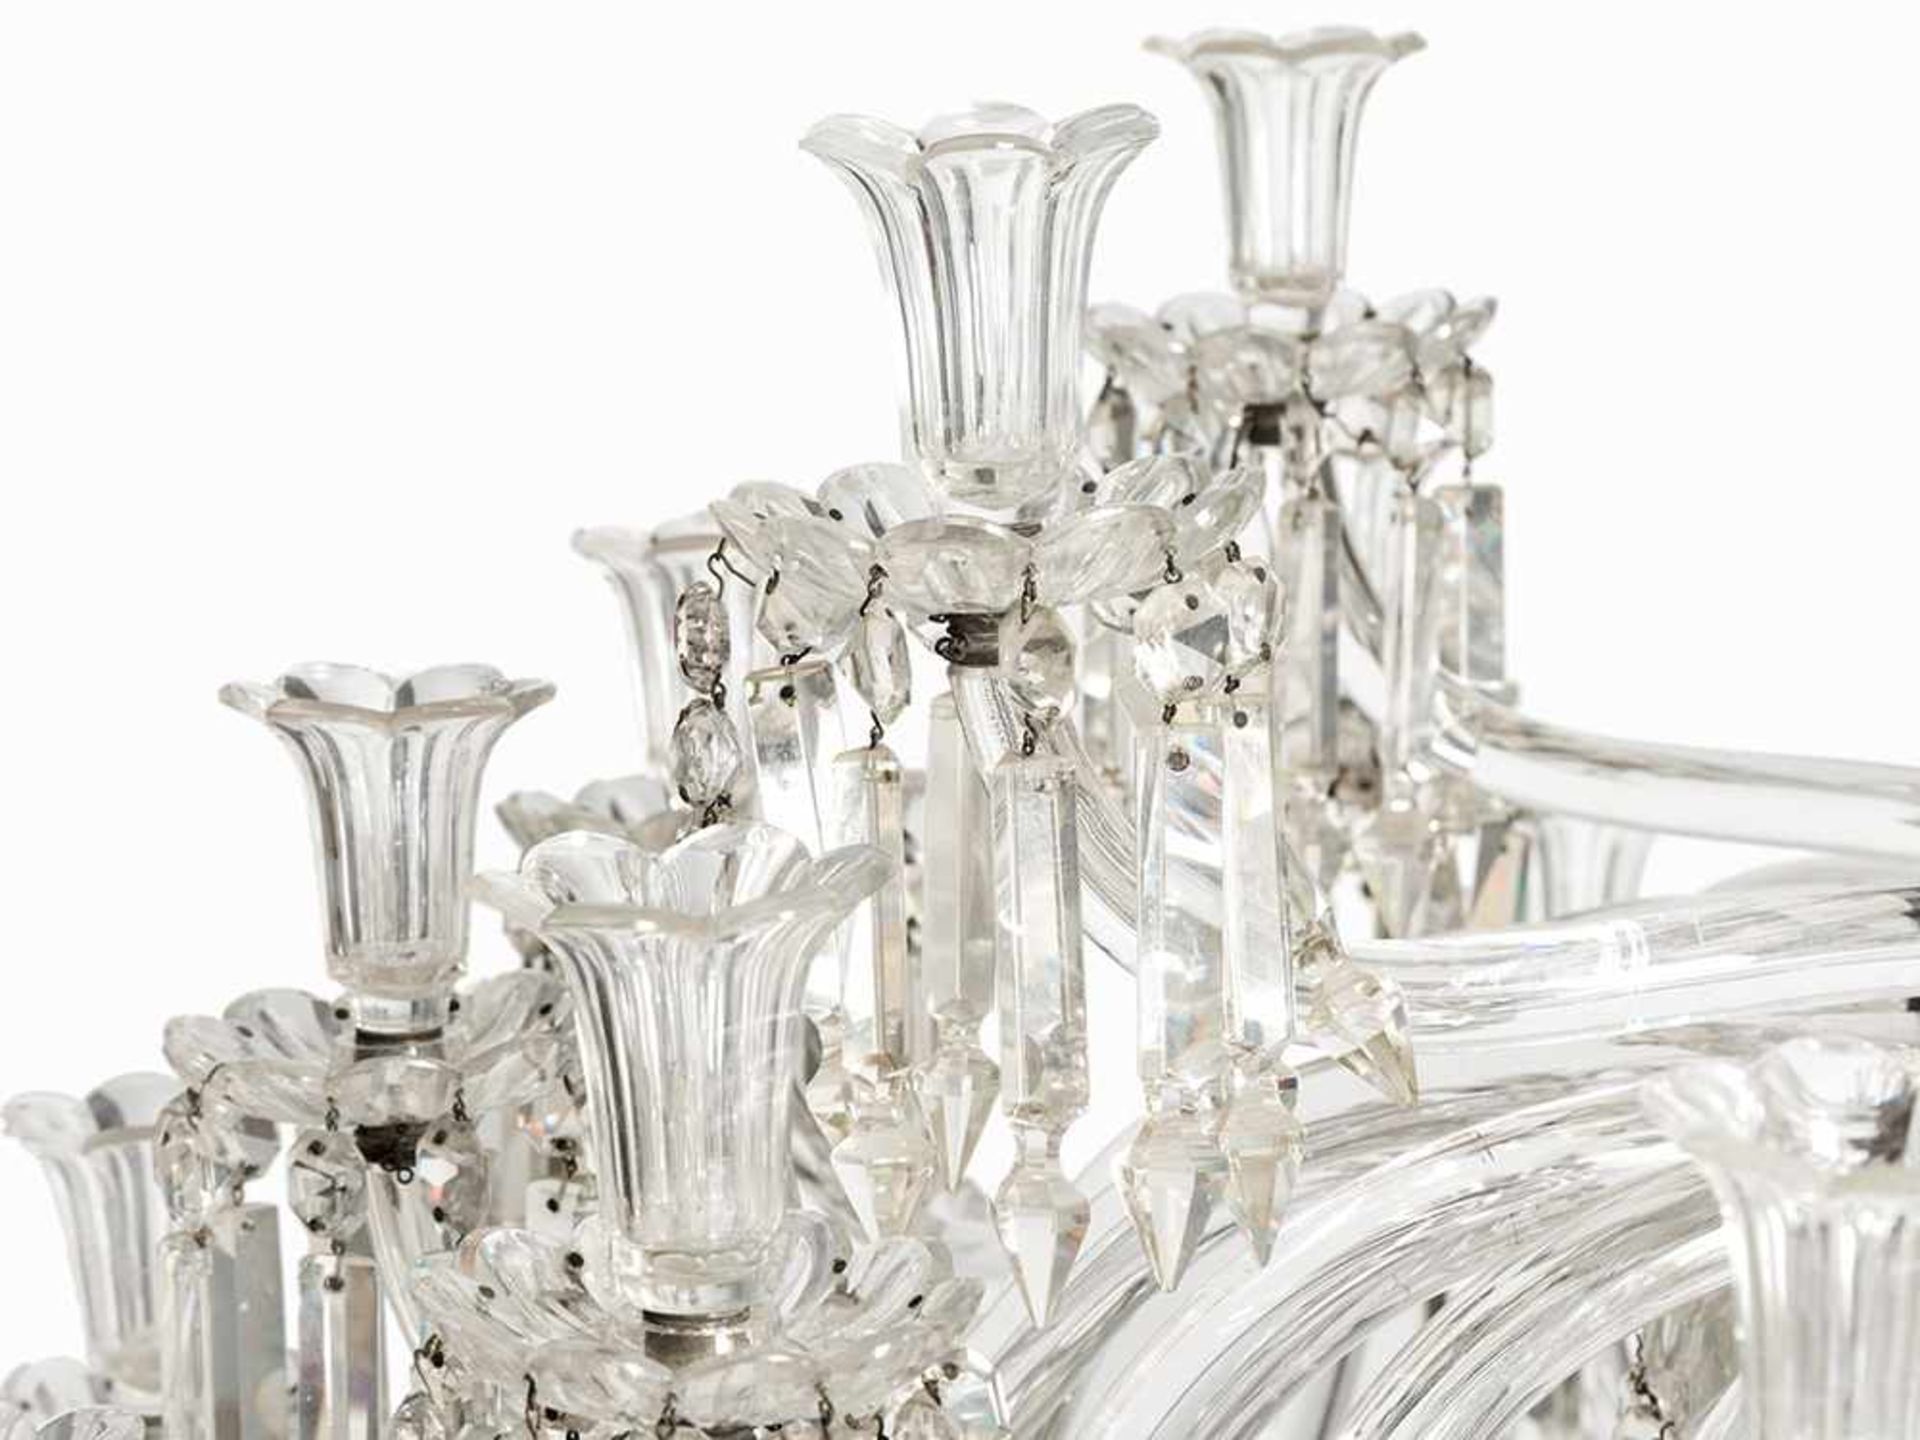 Magnificent Baccarat Chandelier, France, 19th C. Baccarat crystal France, 19th century 30 electric - Image 3 of 10